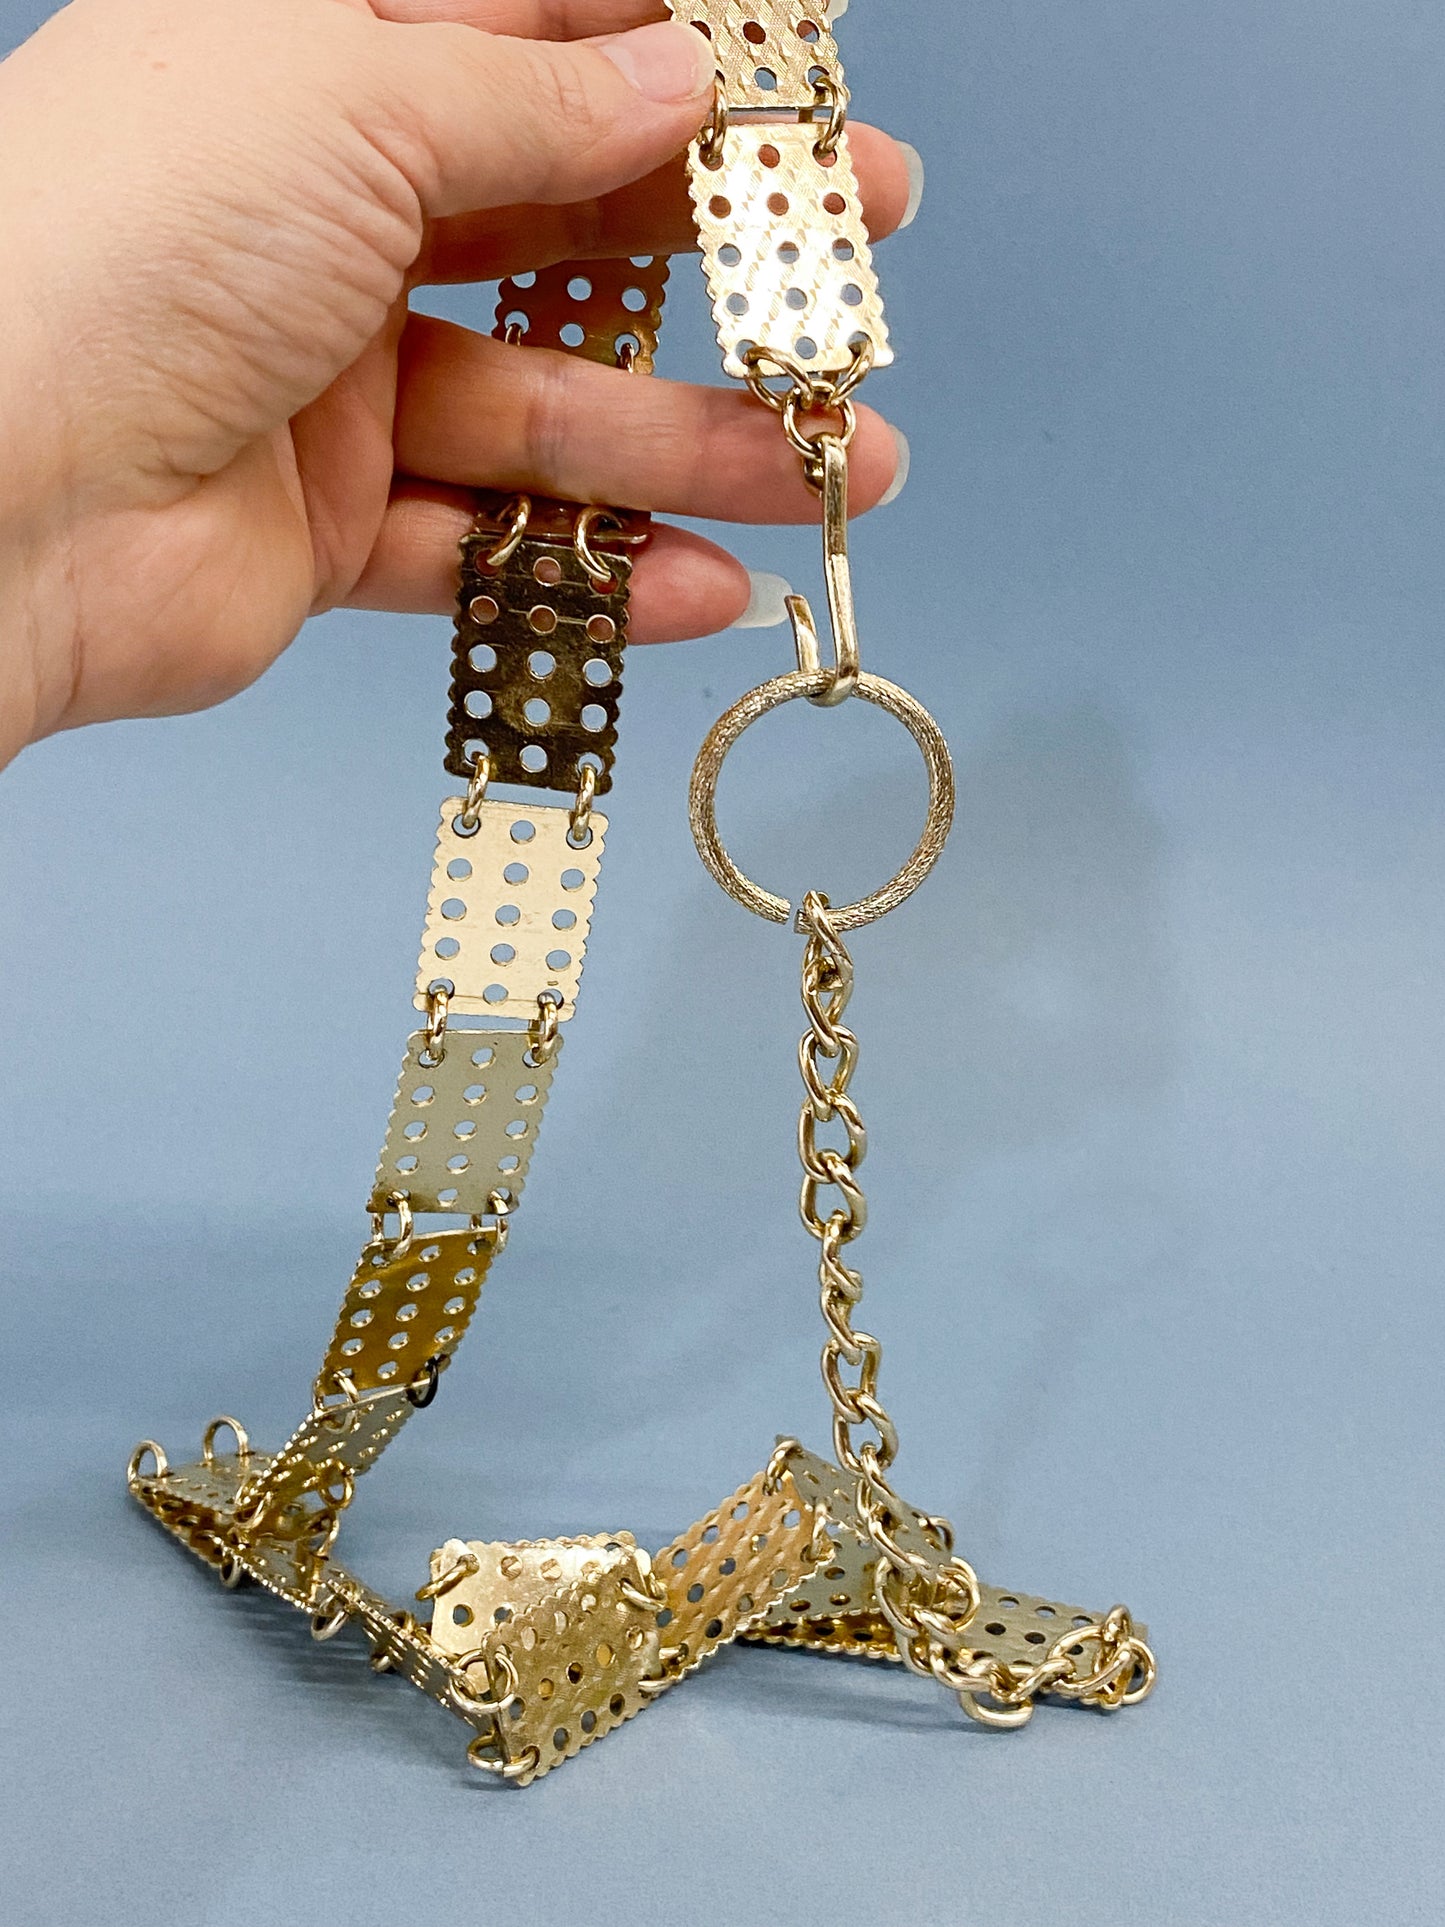 60’s 70's Gold Punch Card Chain Belt